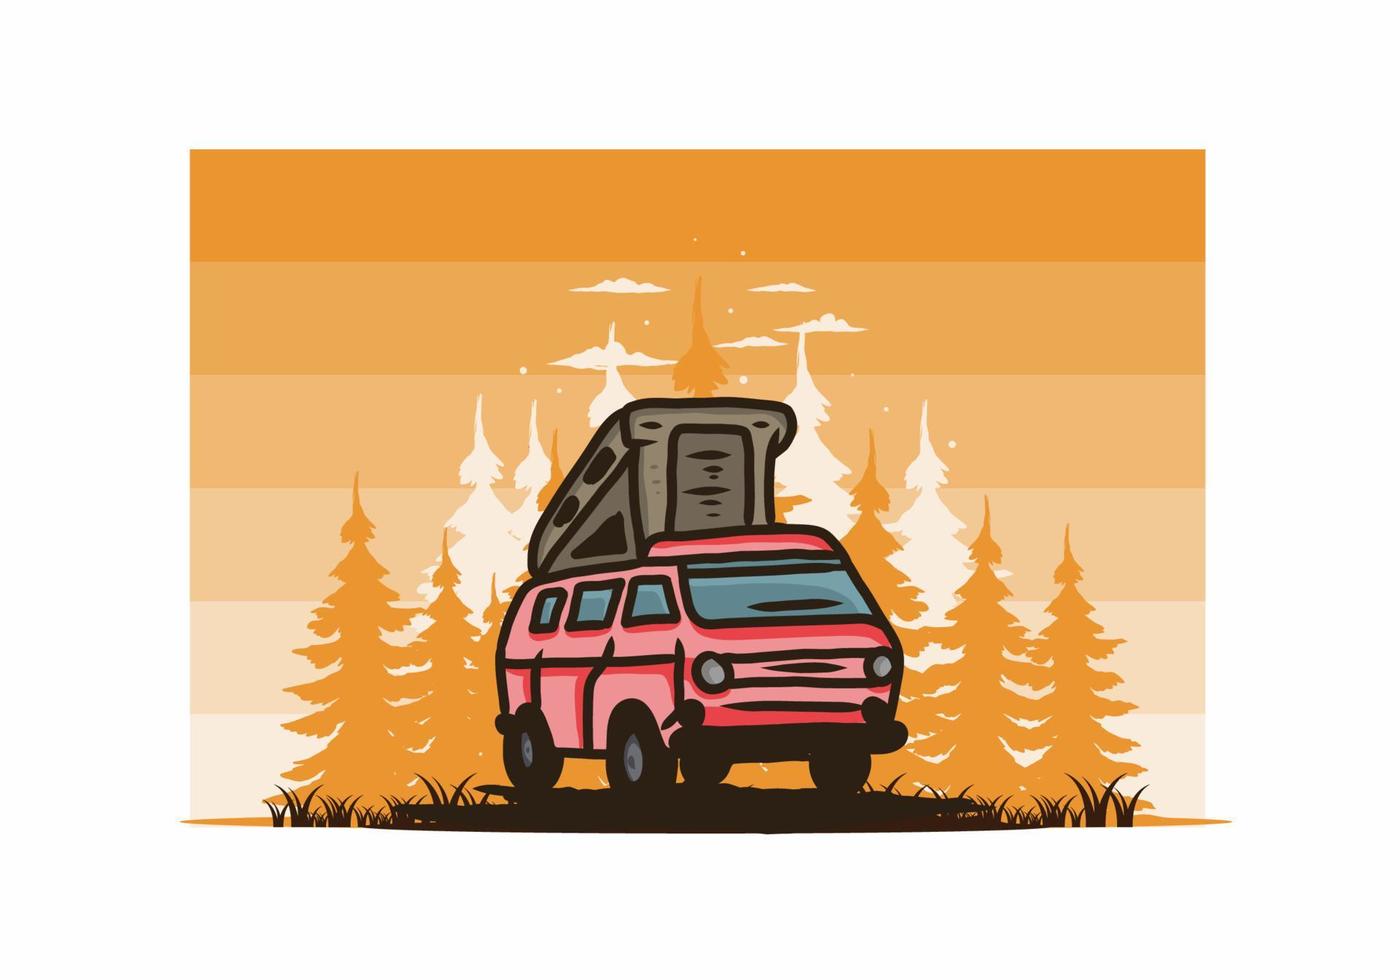 Camping van in the jungle illustration vector